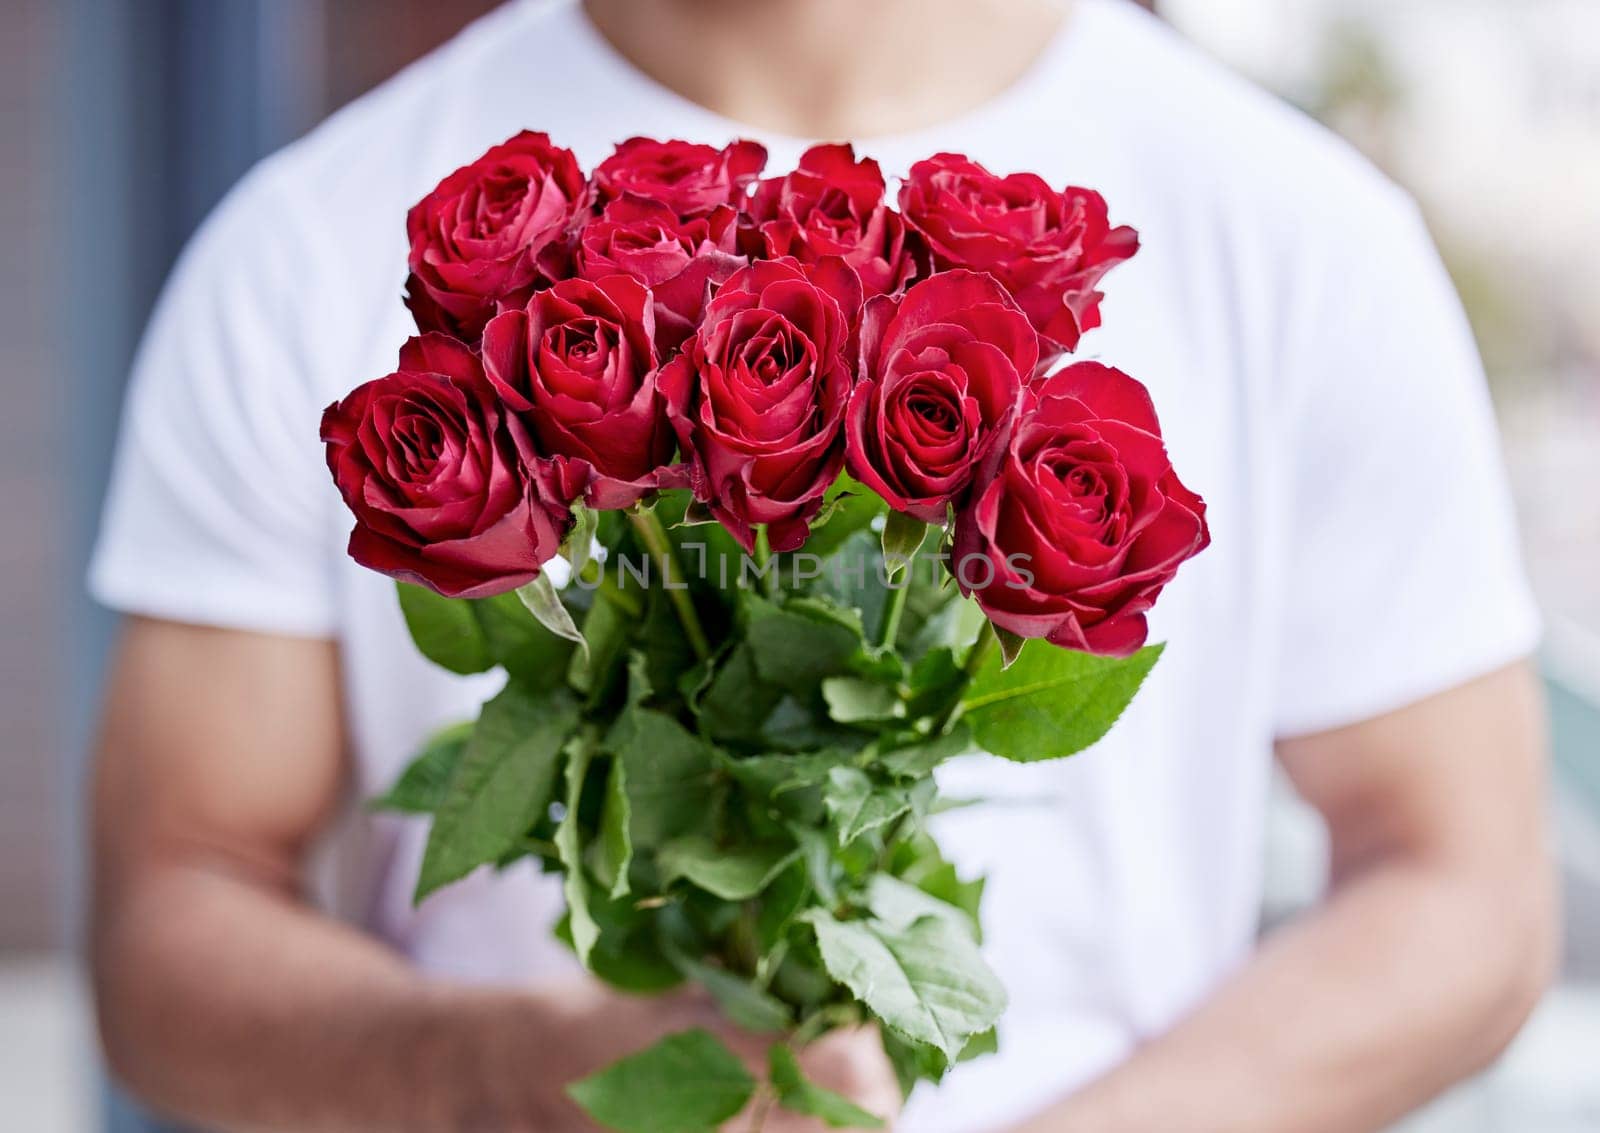 Love, romance and man with bouquet of roses for date, care for valentines day and gratitude. Romantic surprise, floral gift and person giving red flowers standing outside for proposal or engagement.